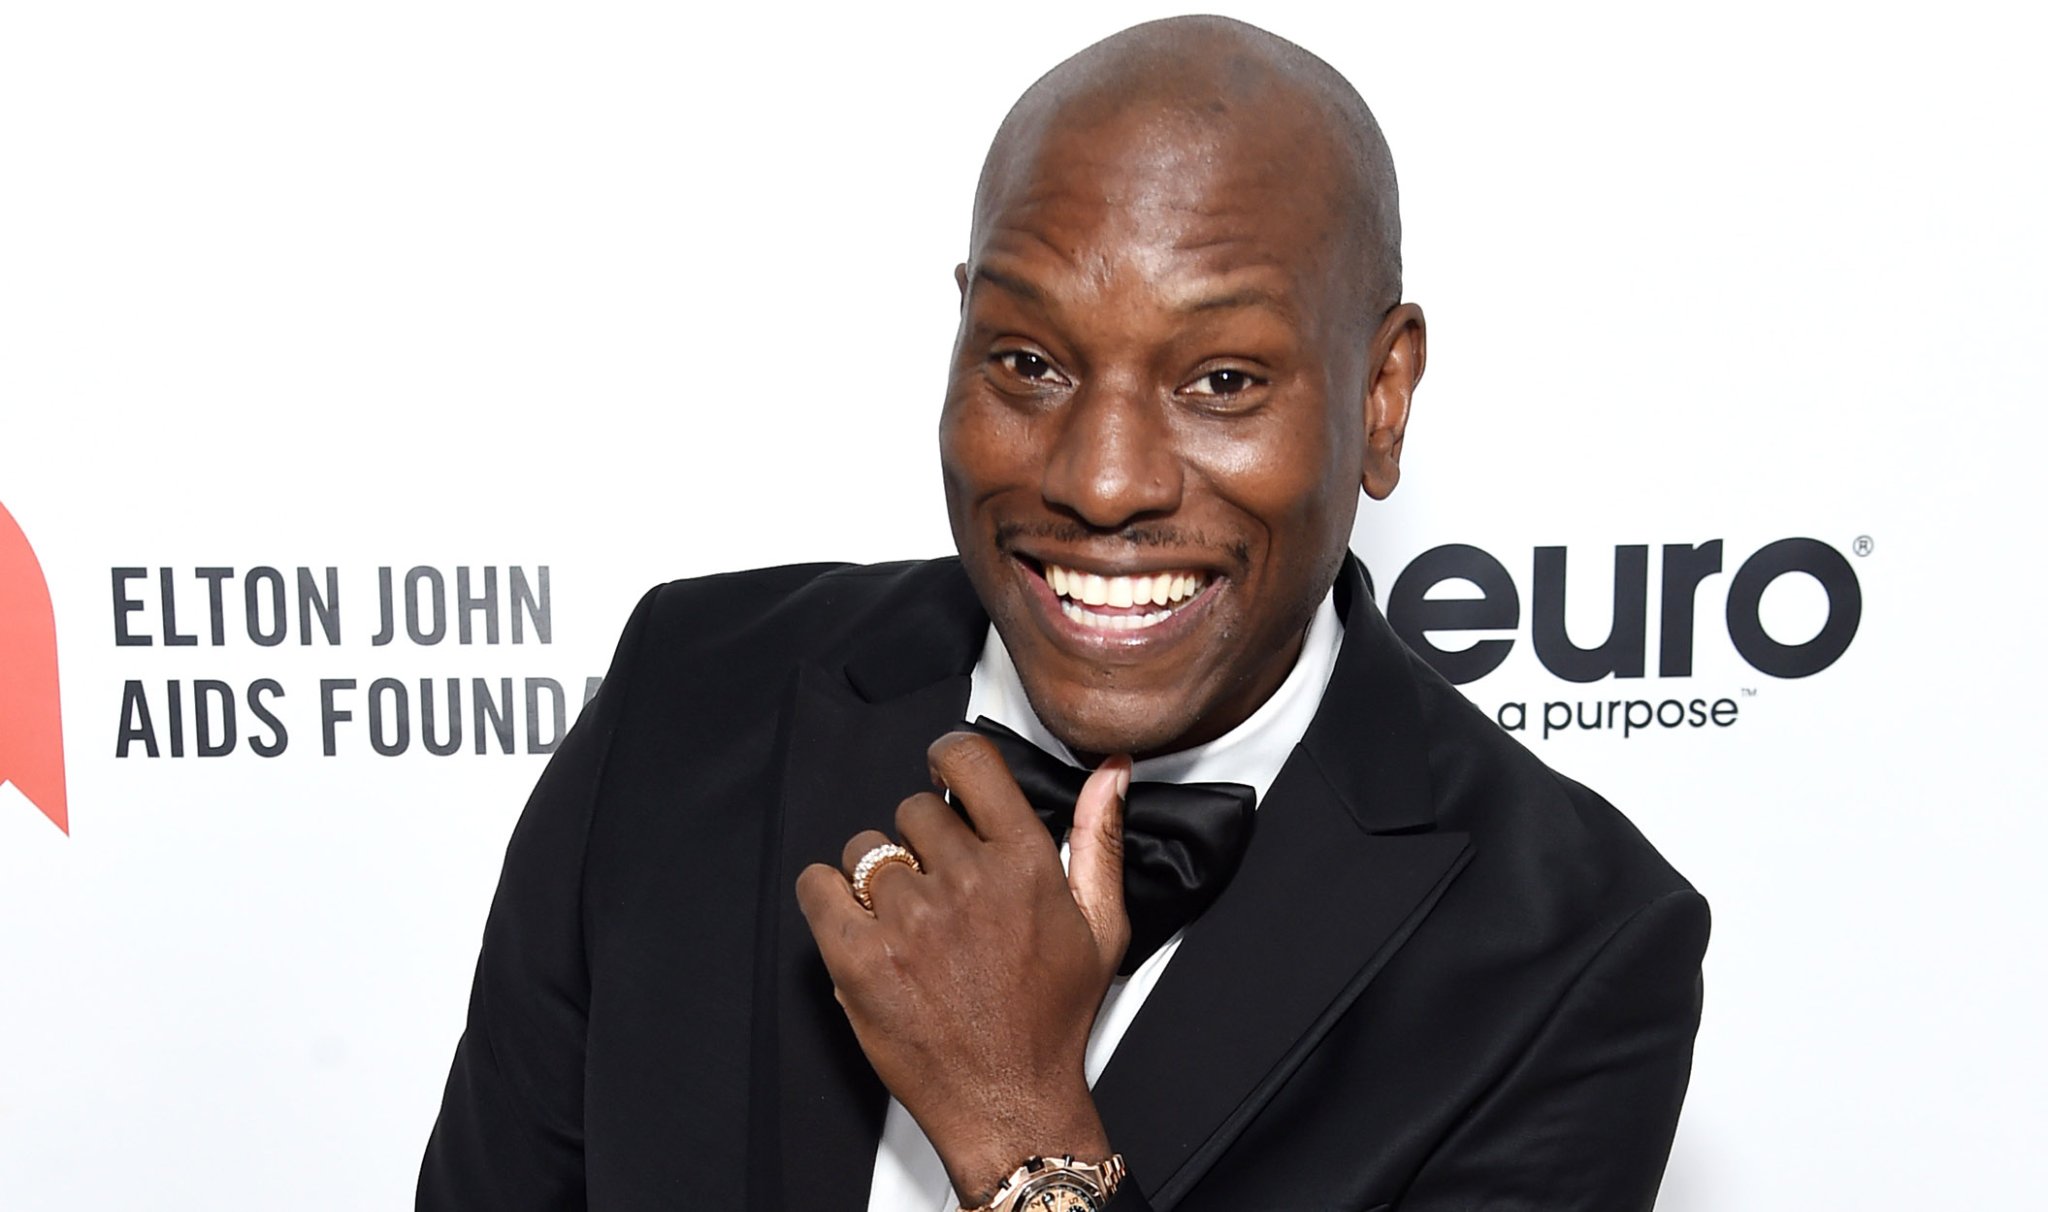 The internet is roasting Tyrese for his wild COVID-19 prevention tip